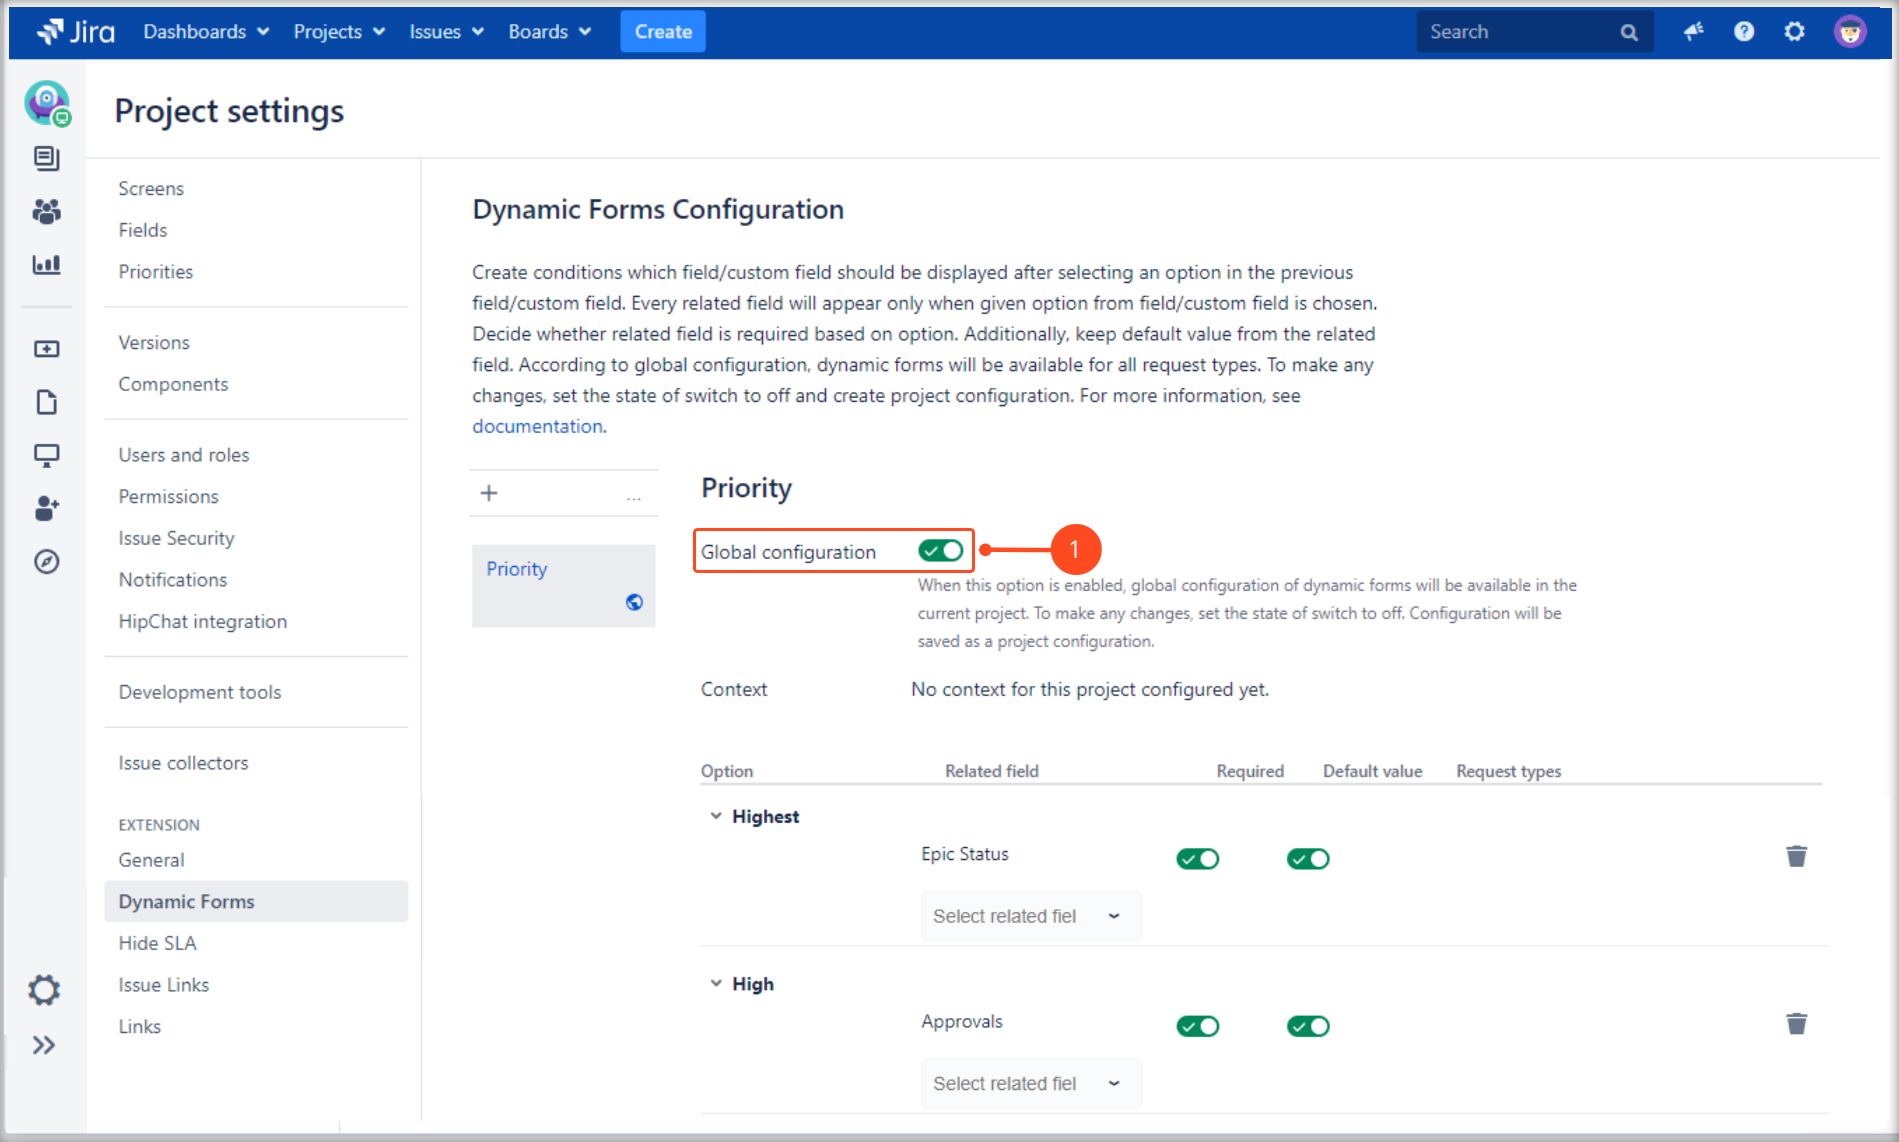 Extension for Jira Service Management: Dynamic Forms Project Configuration